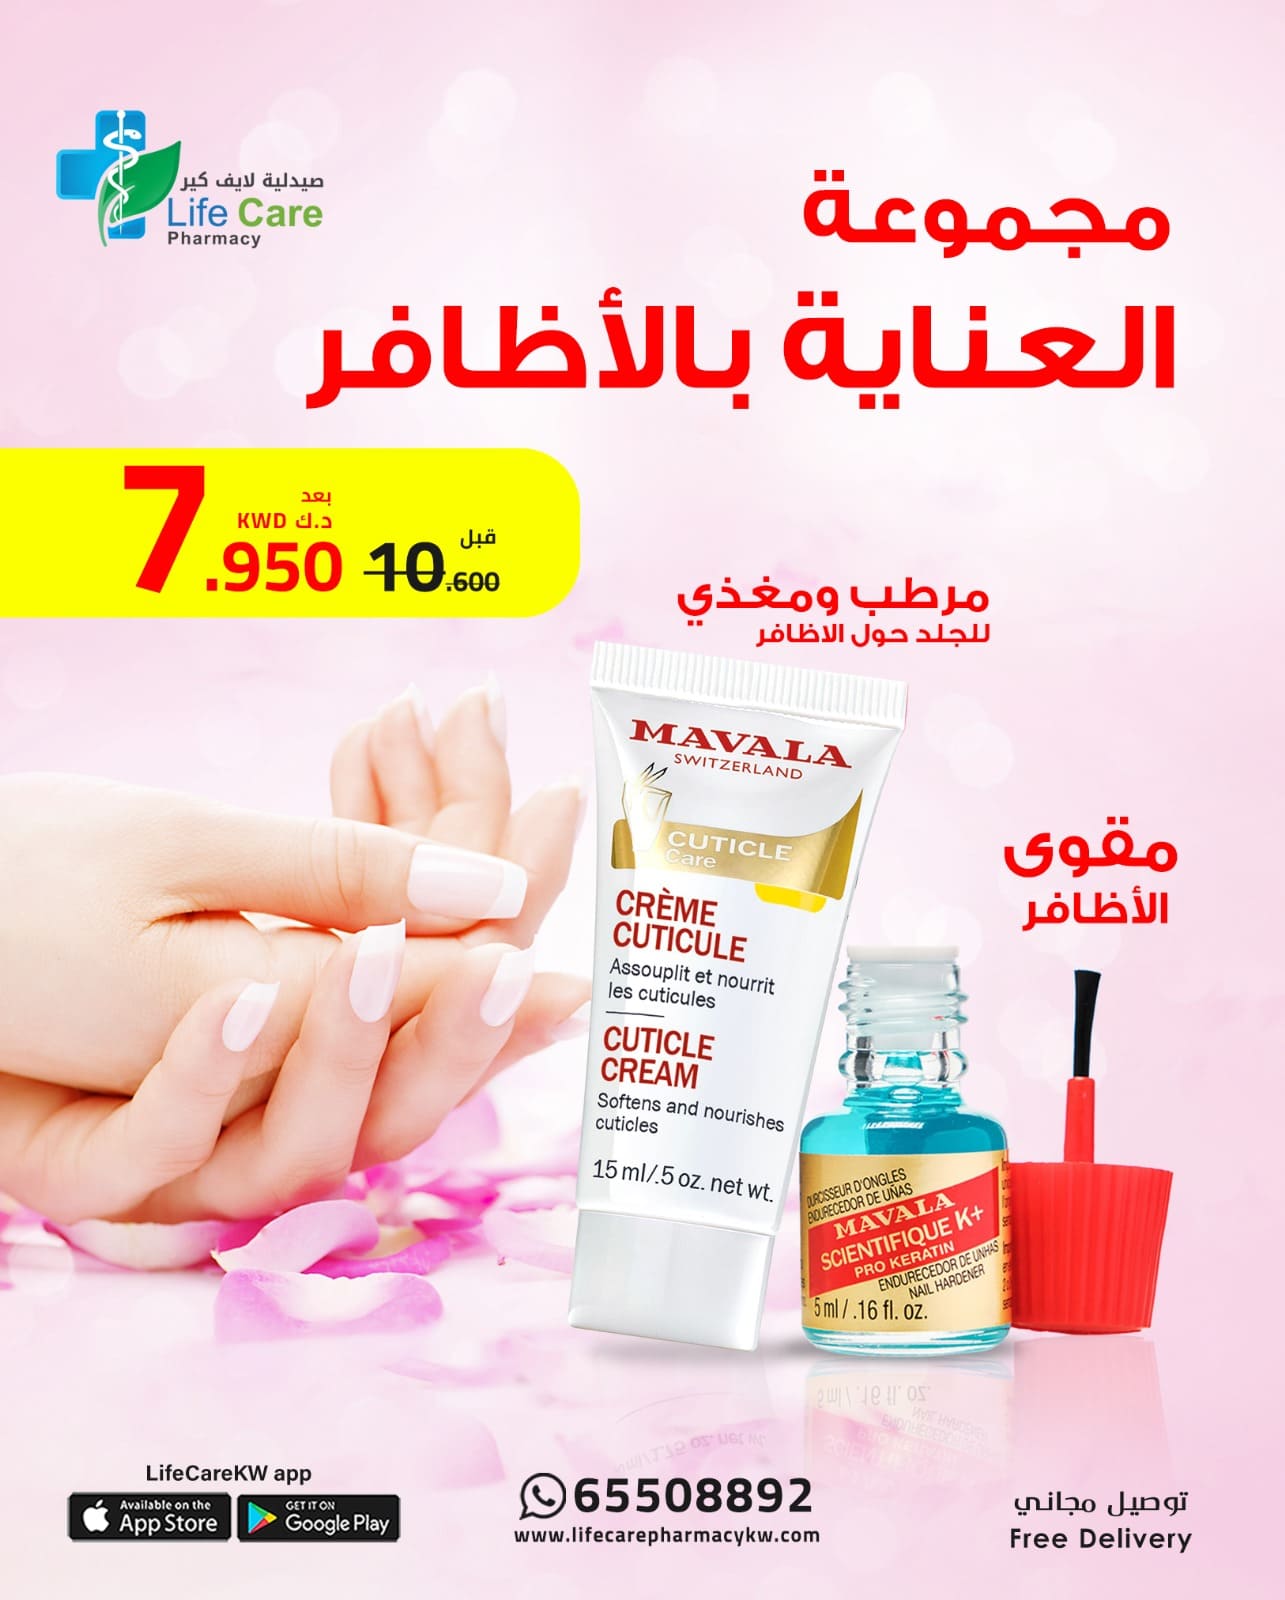 PACKAGE 253 - Life Care Pharmacy